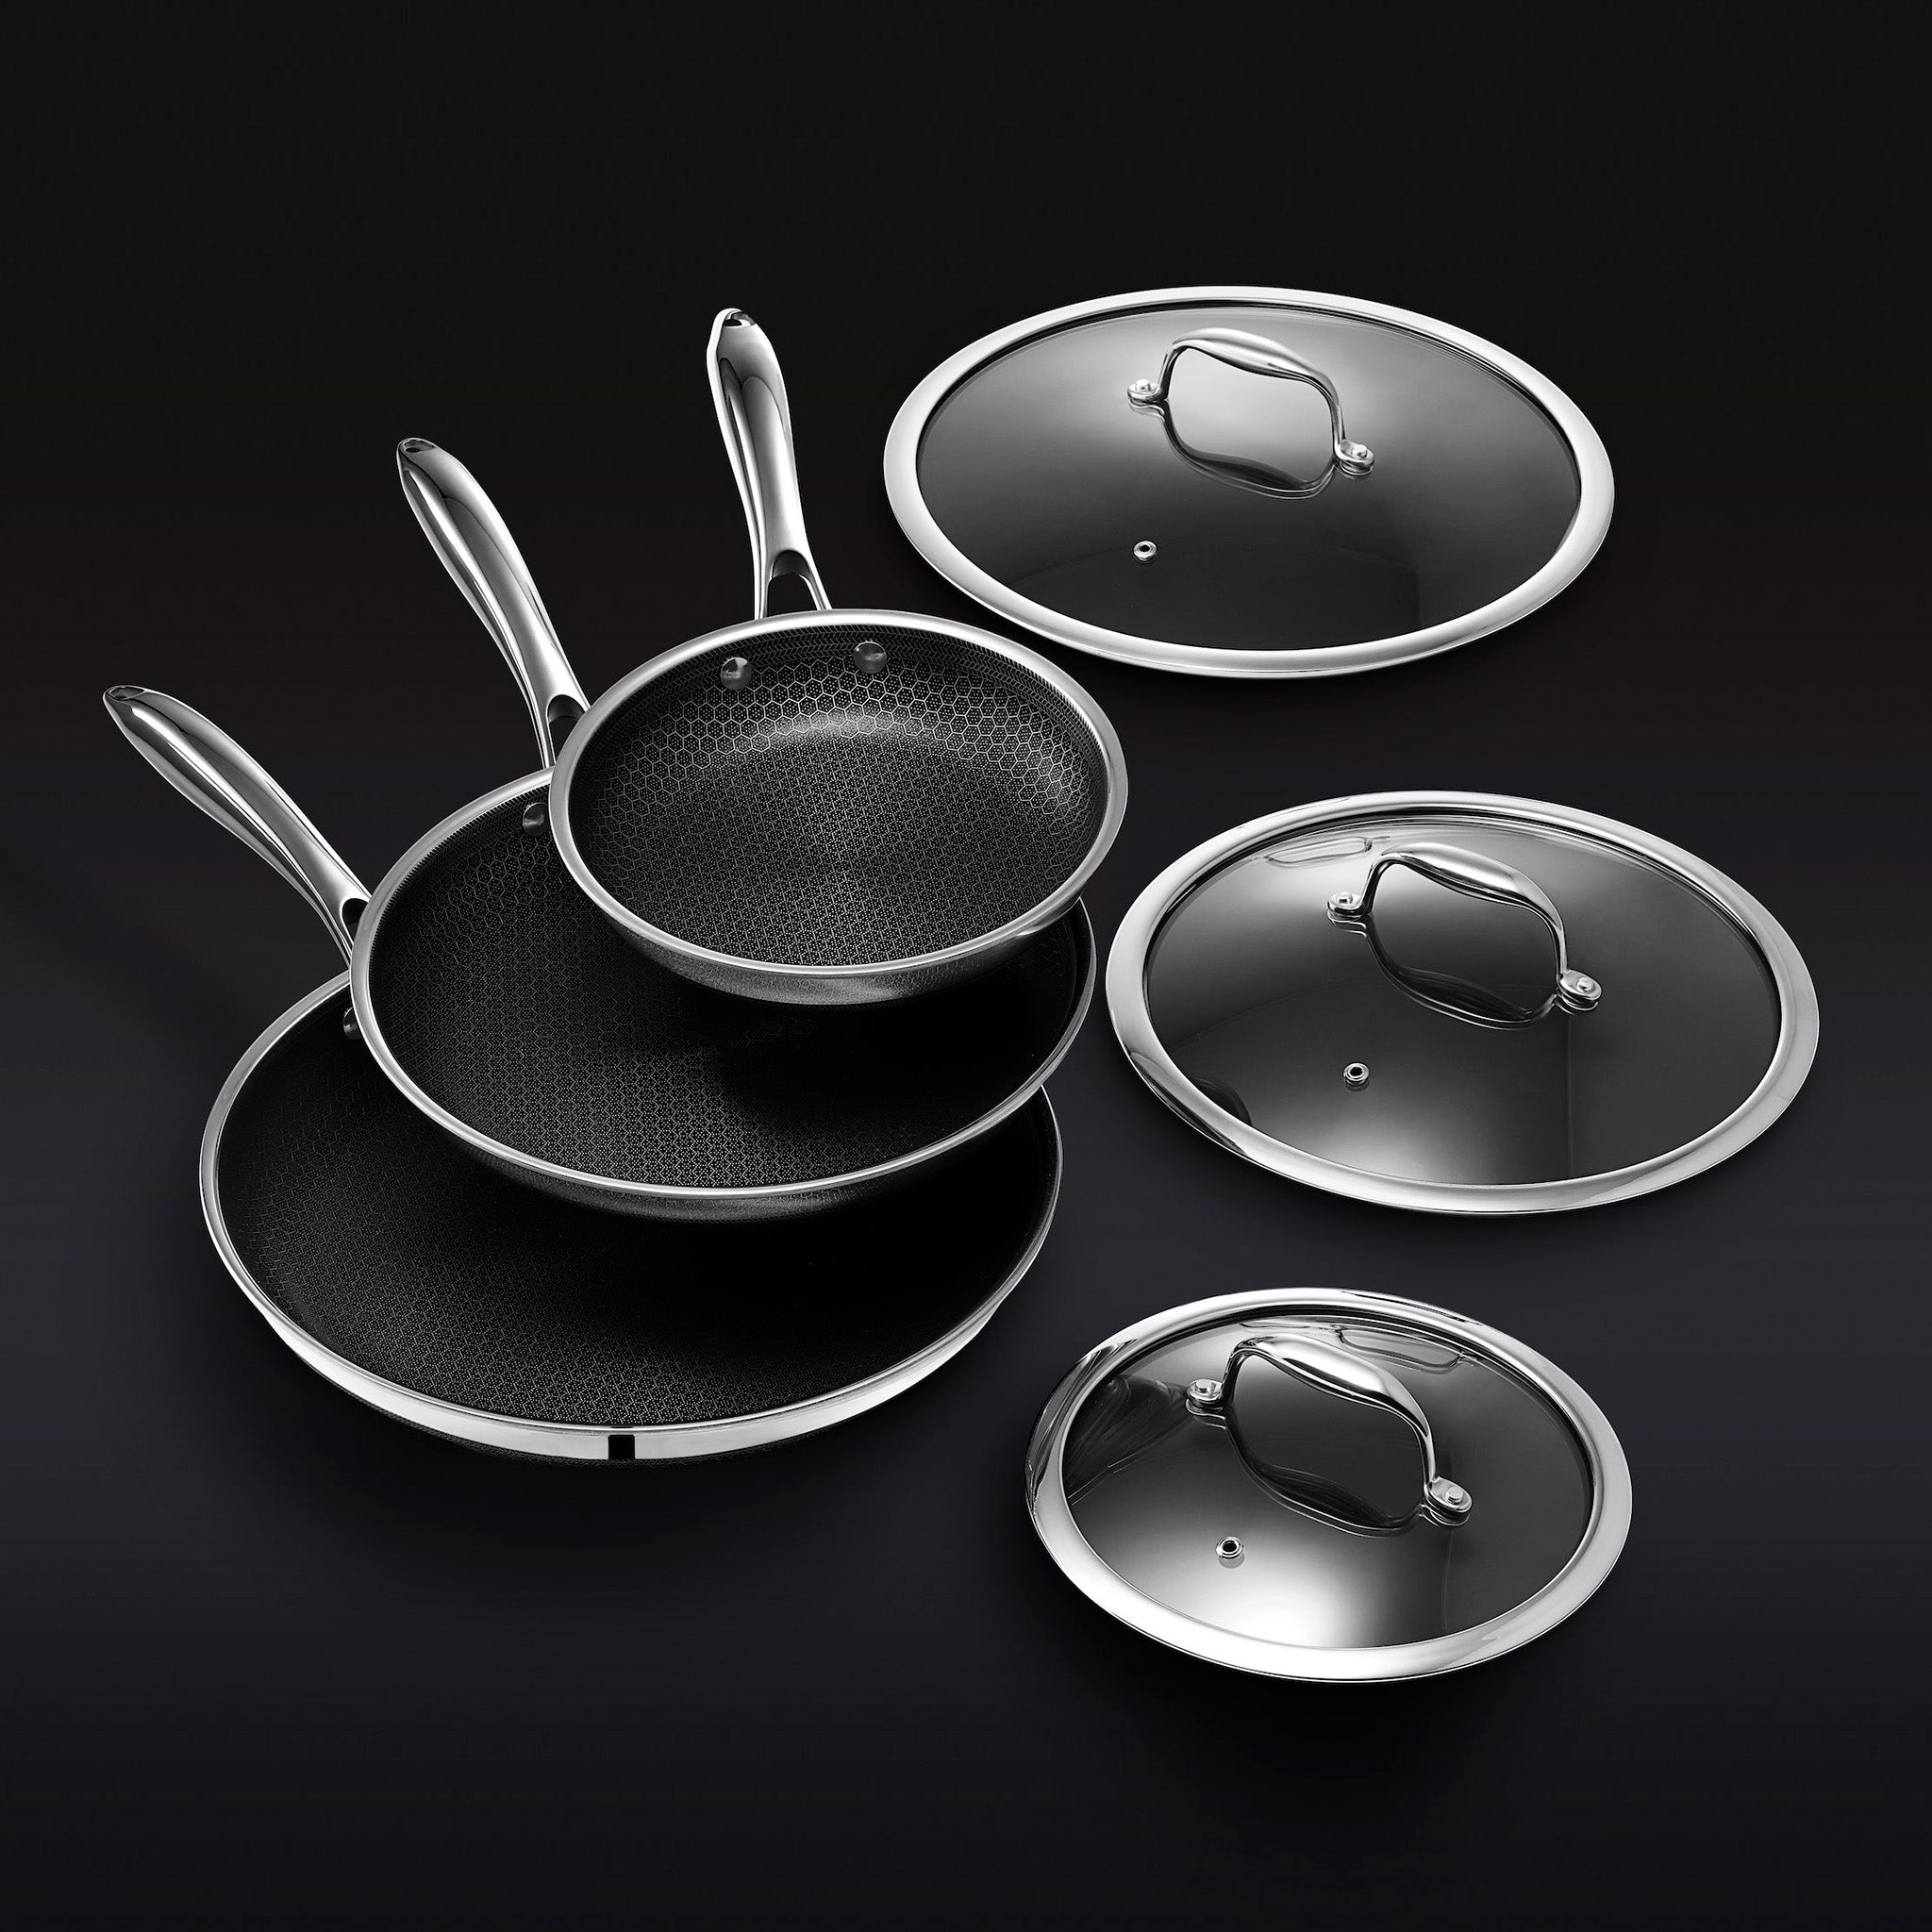 HexClad 4 Piece Hybrid Stainless Steel Cookware Set - 10 Inch